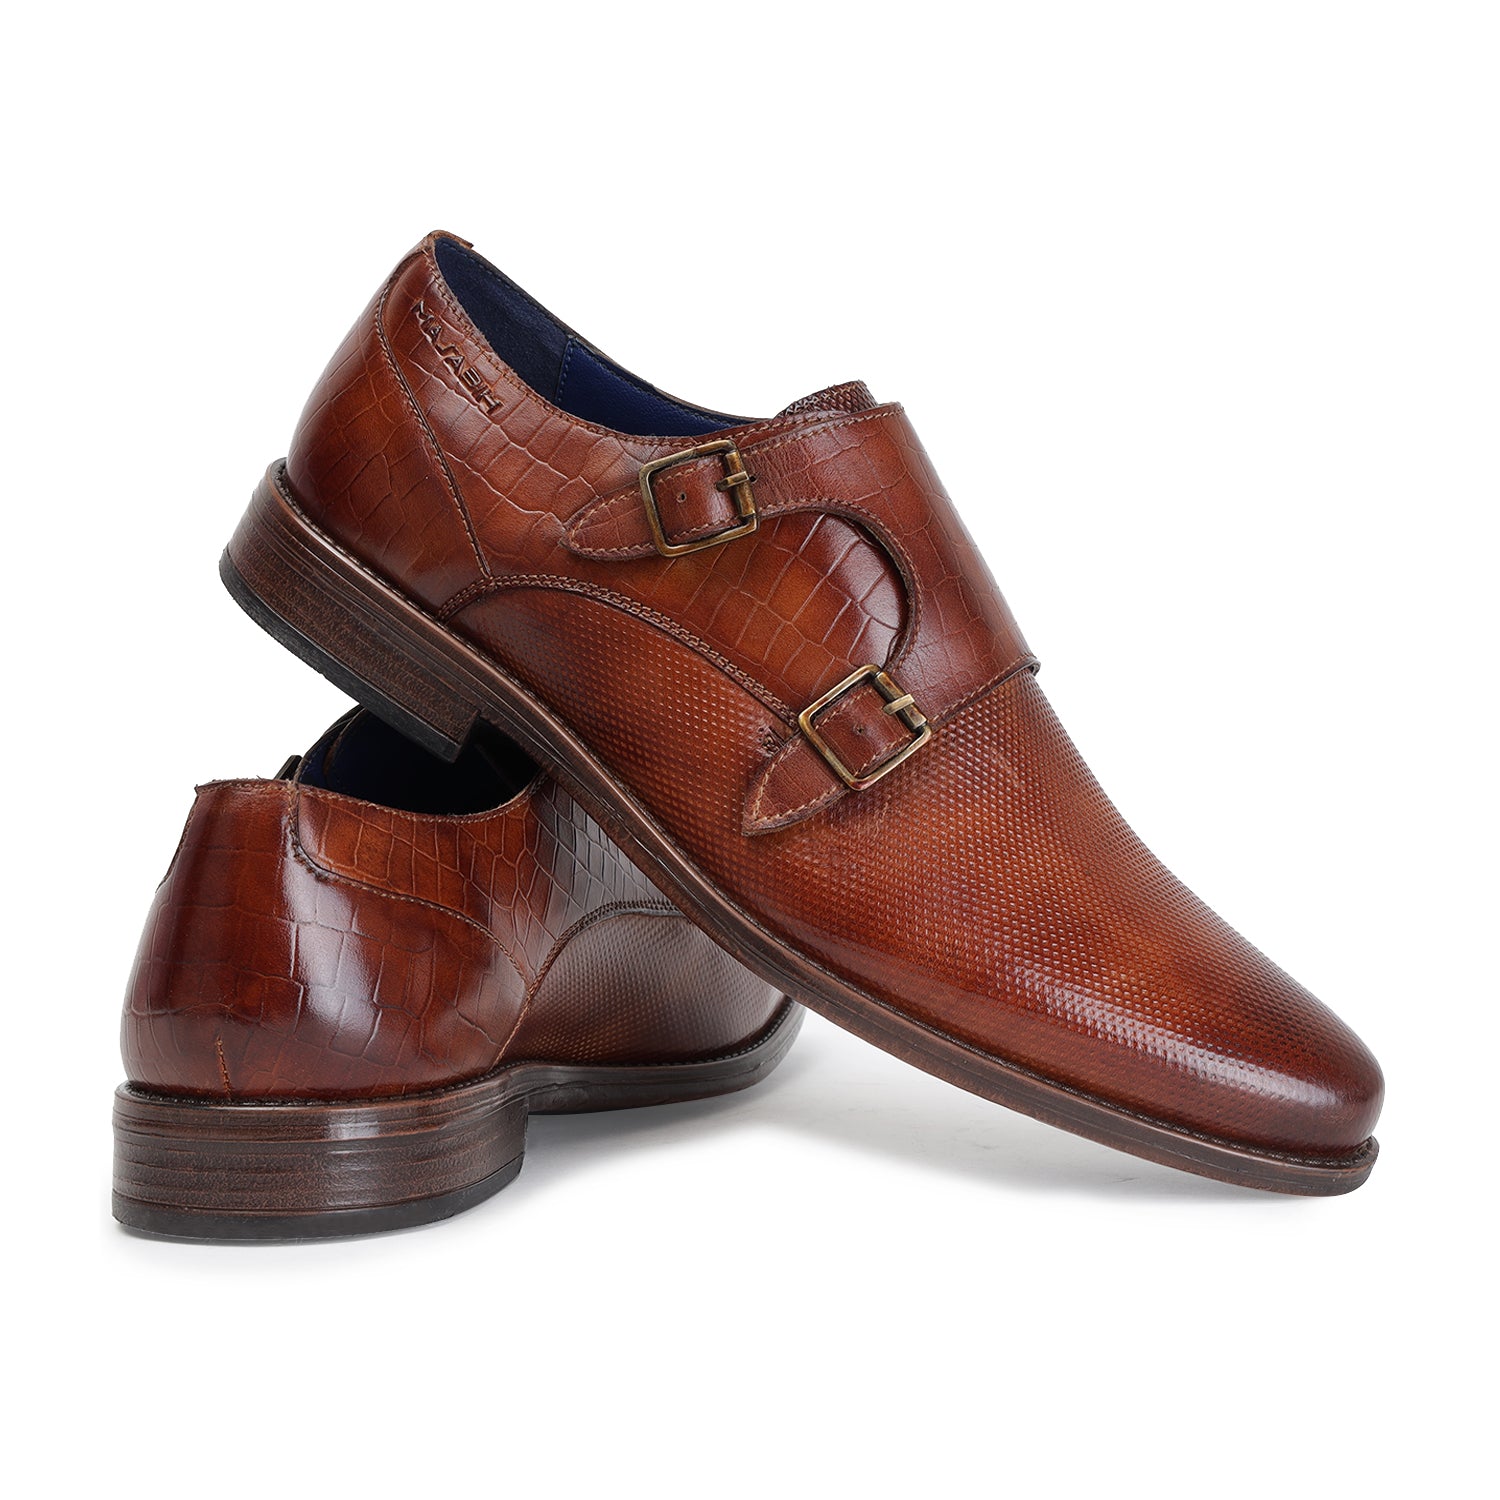 MASABIH GENUINE LEATHER TAN CASUAL DOUBLE MONK SHOES FOR MEN